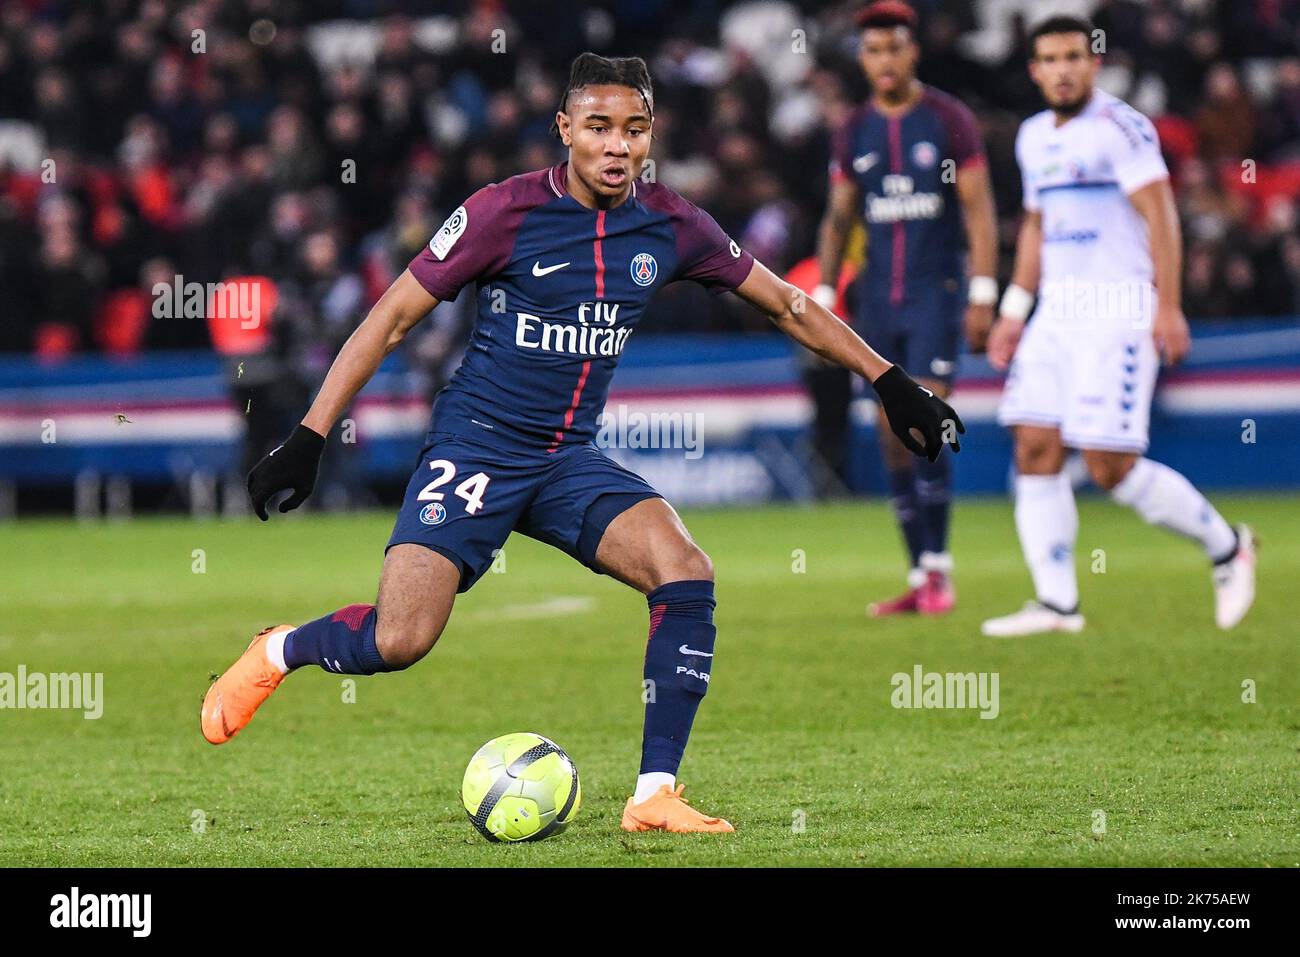 Paris Saint Germain's Christopher Nkunku in action during the French Ligue 1 soccer match between Paris Saint Germain (PSG) and Racing Club Strasbourg Alsace at the Parc des Princes stadium in Paris, France, 17 February 2018.  Stock Photo